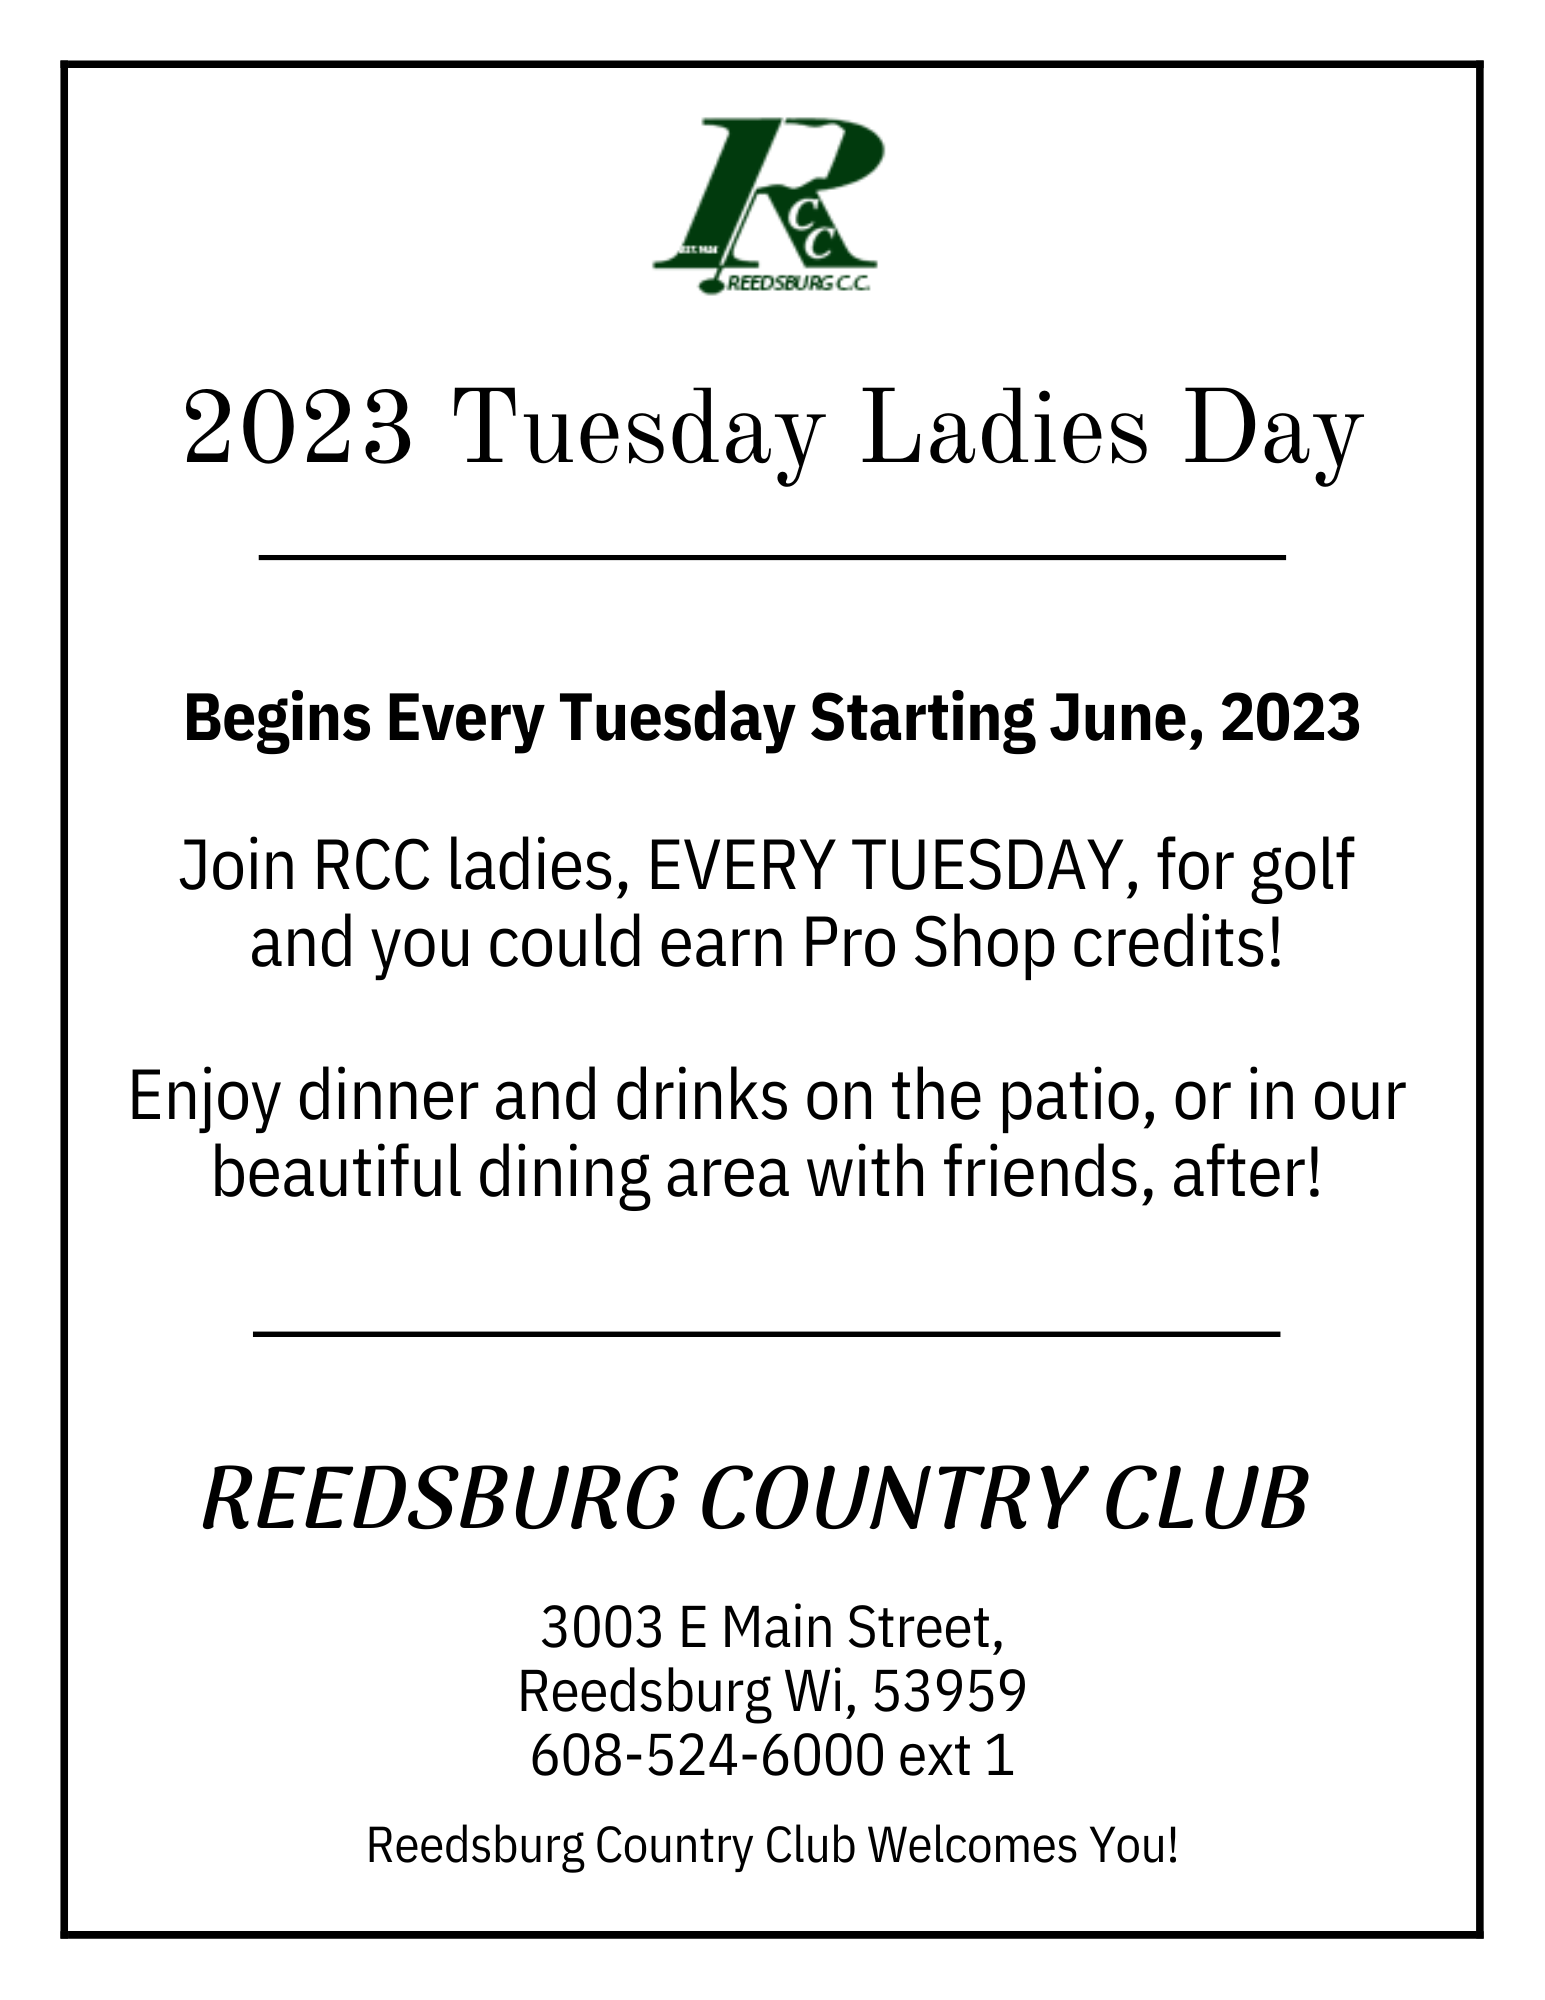 Tuesday Ladies Day Graphic 2